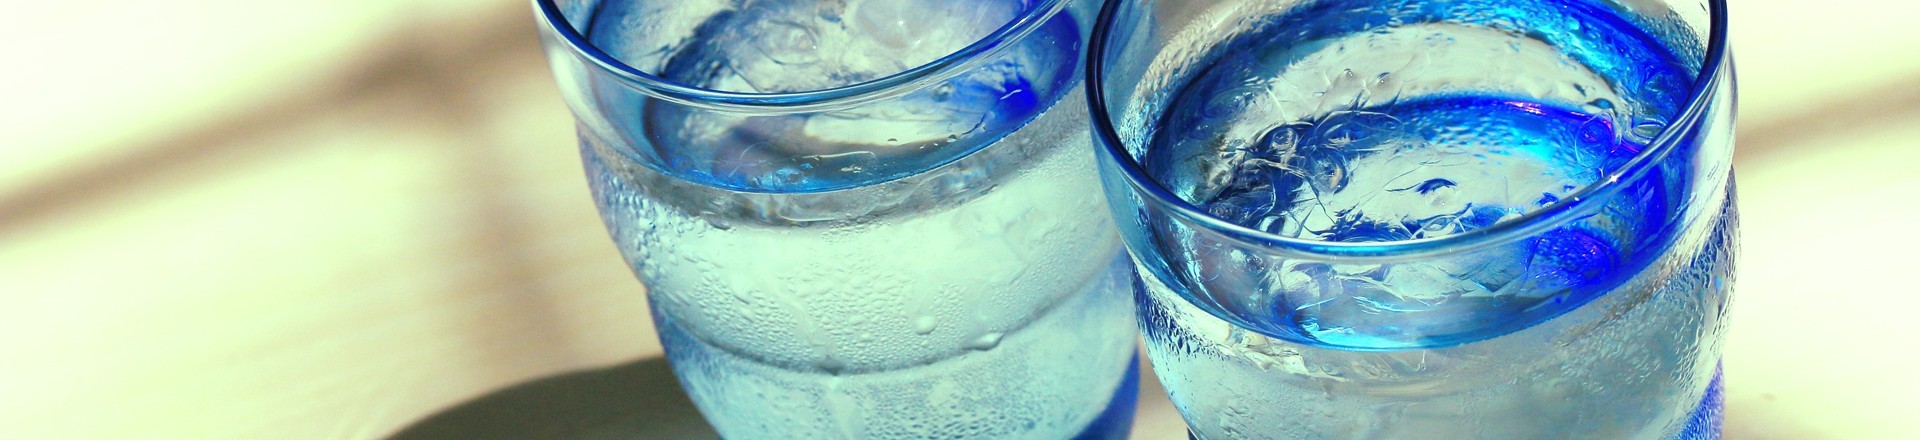 avoid drinking ice water with meals?